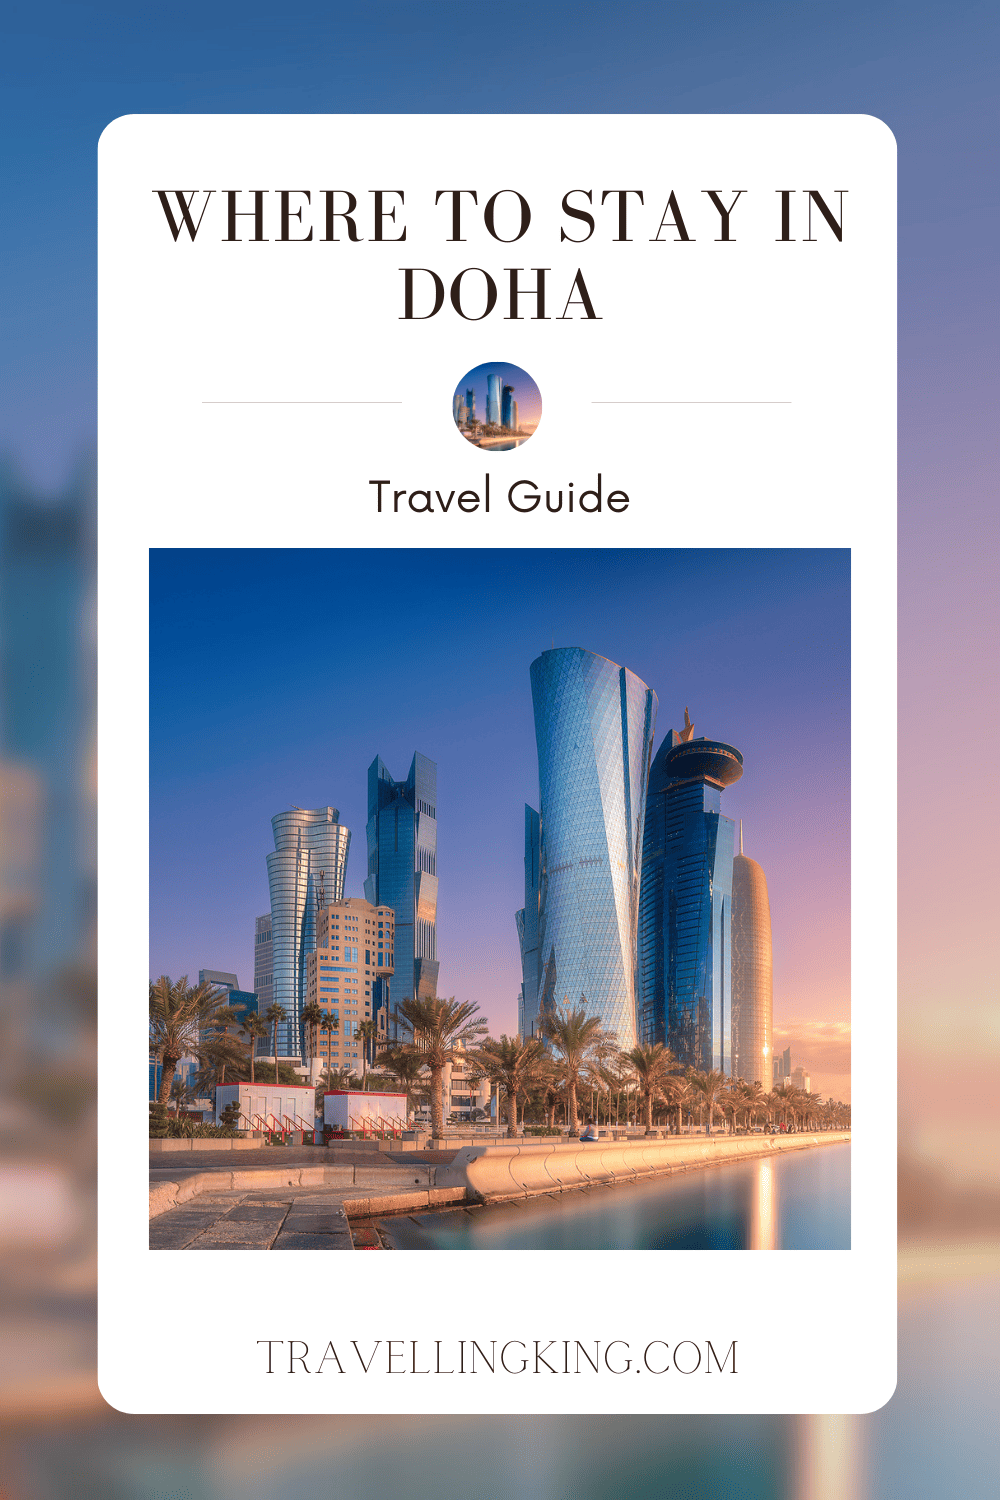 Where to stay in Doha